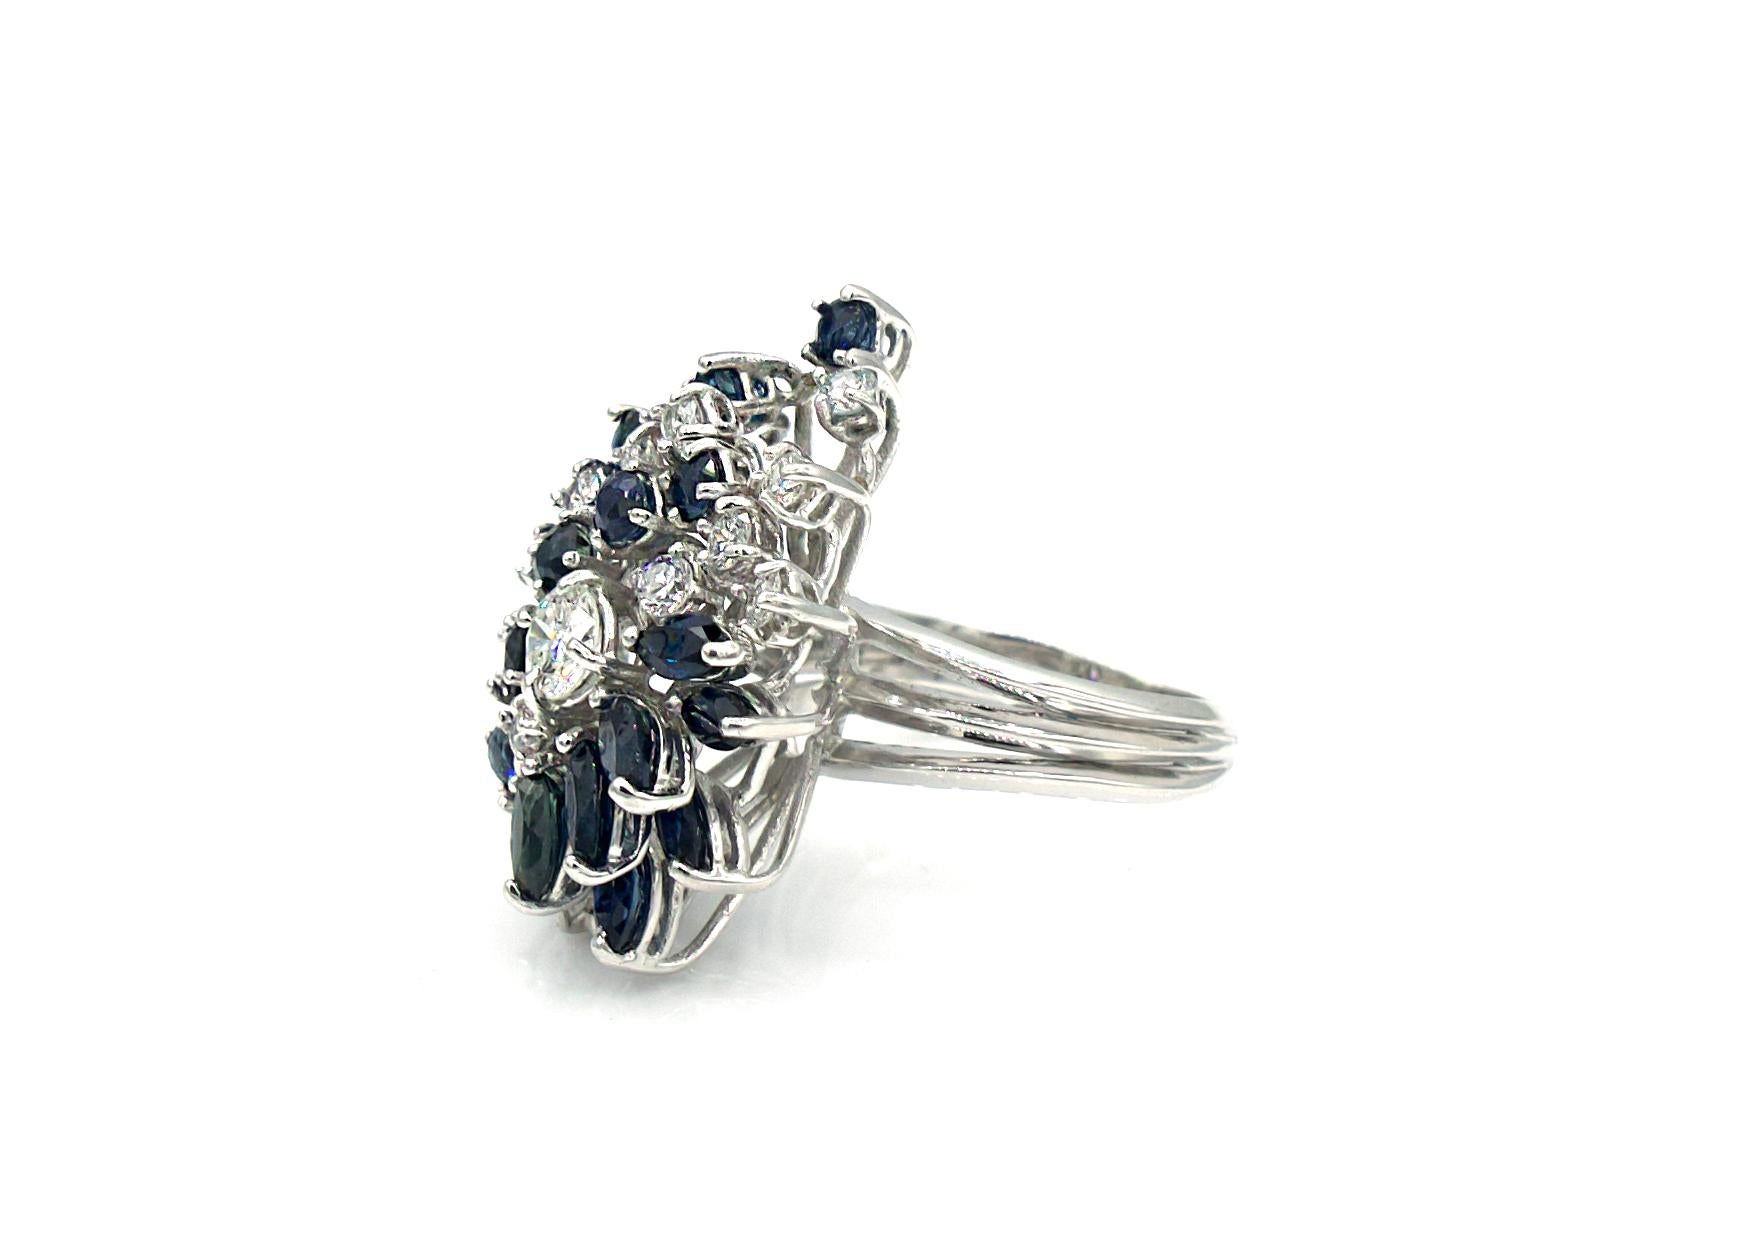 This 1950s Retro ring is made of a combination of shiny marquise-cut and round-cut blue sapphires and diamonds that coalesce in layers and cluster around a slightly larger center diamond, weighing 3 Carats total. The sapphires and diamonds are